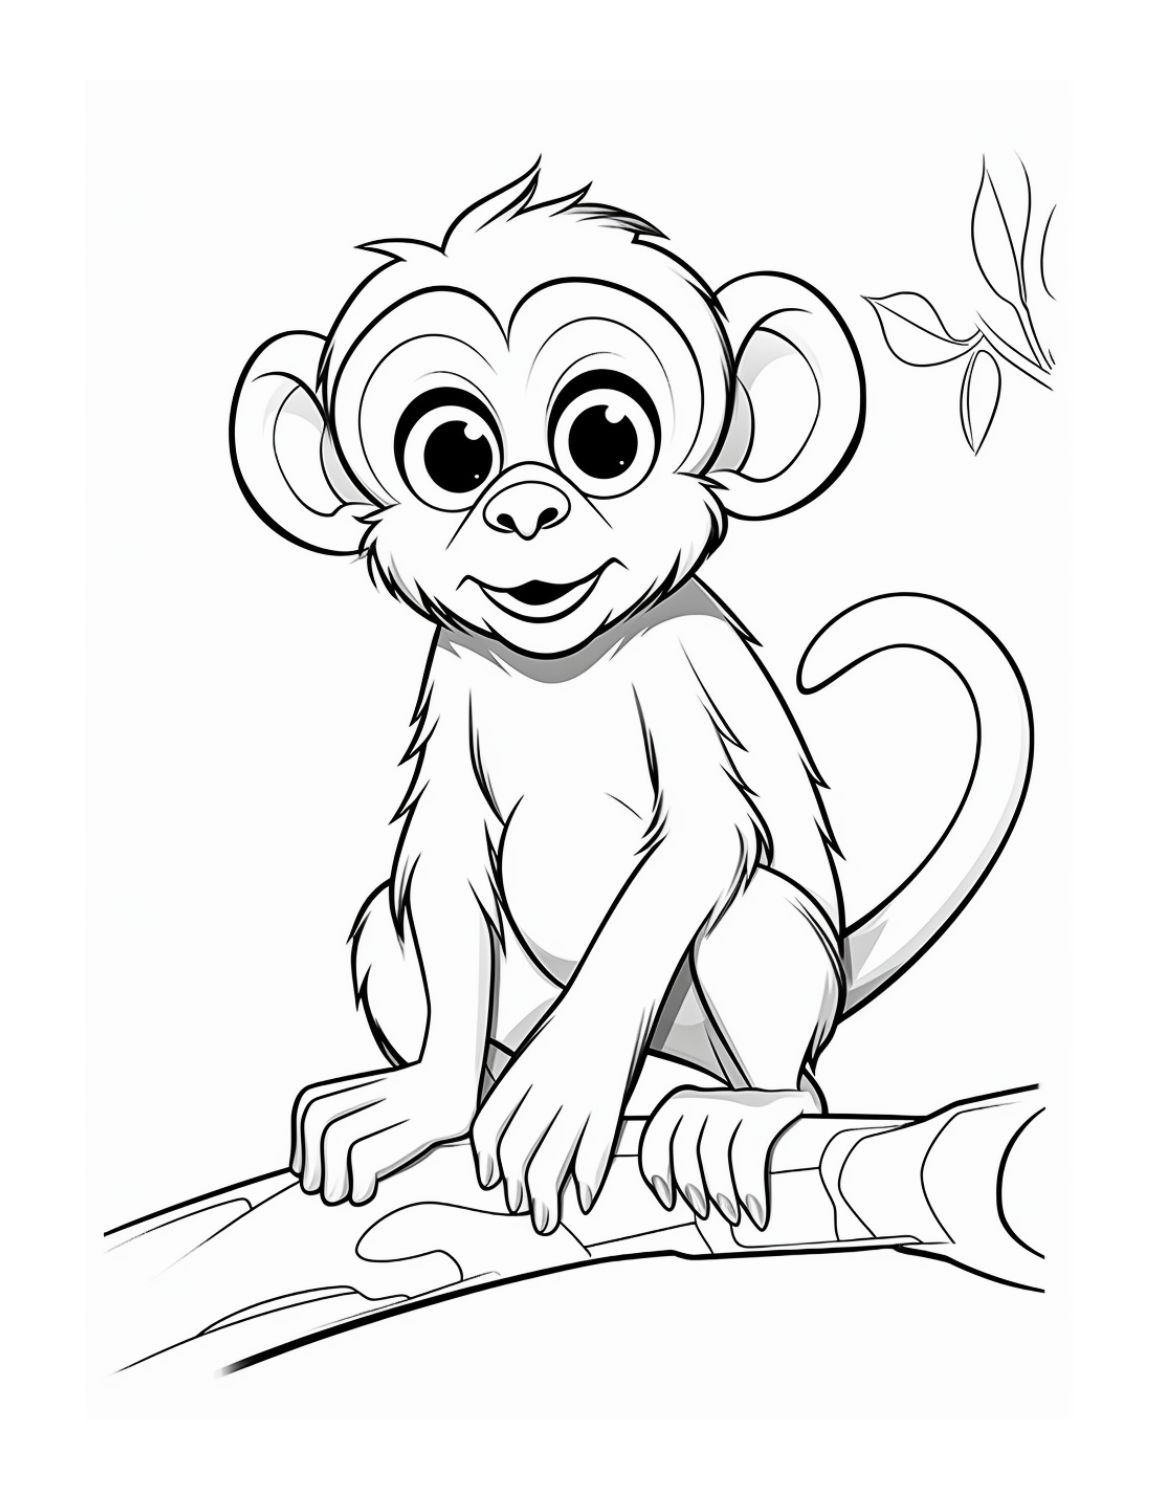 Free printable monkey coloring pages skip to my lou